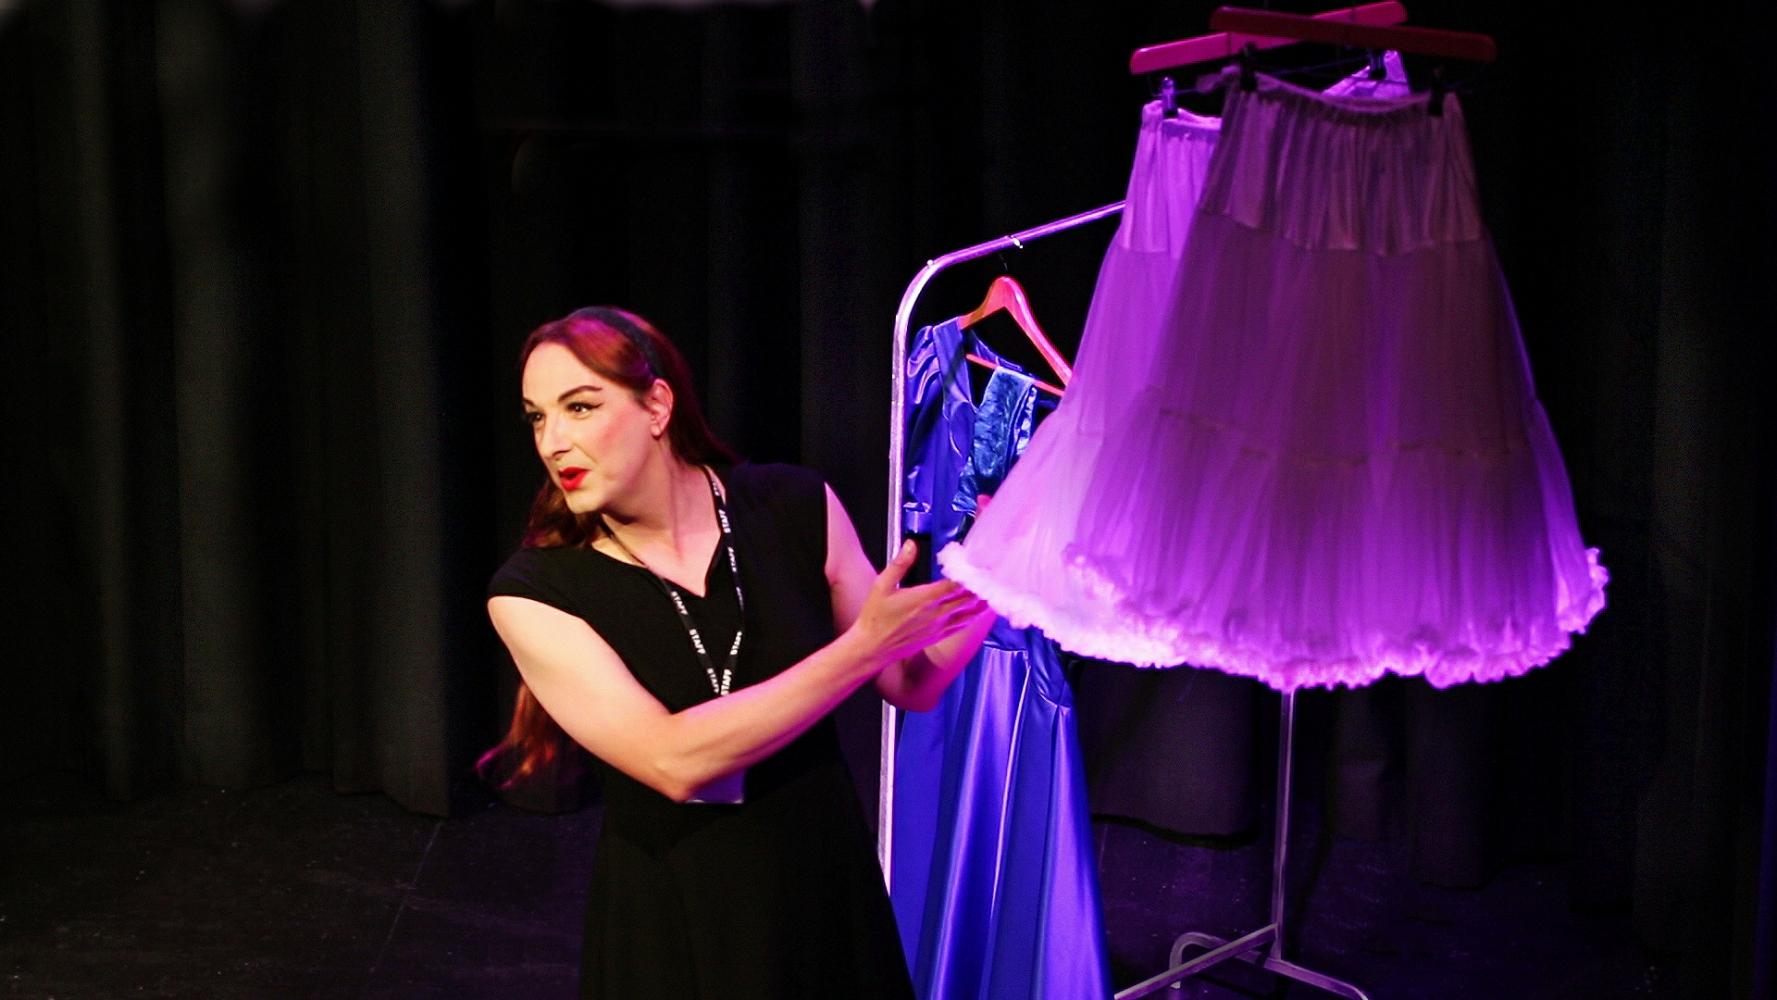 A woman with long red/brown hair, wearing a black dress displays a purple lit retro petticoat hanging from the ceiling.